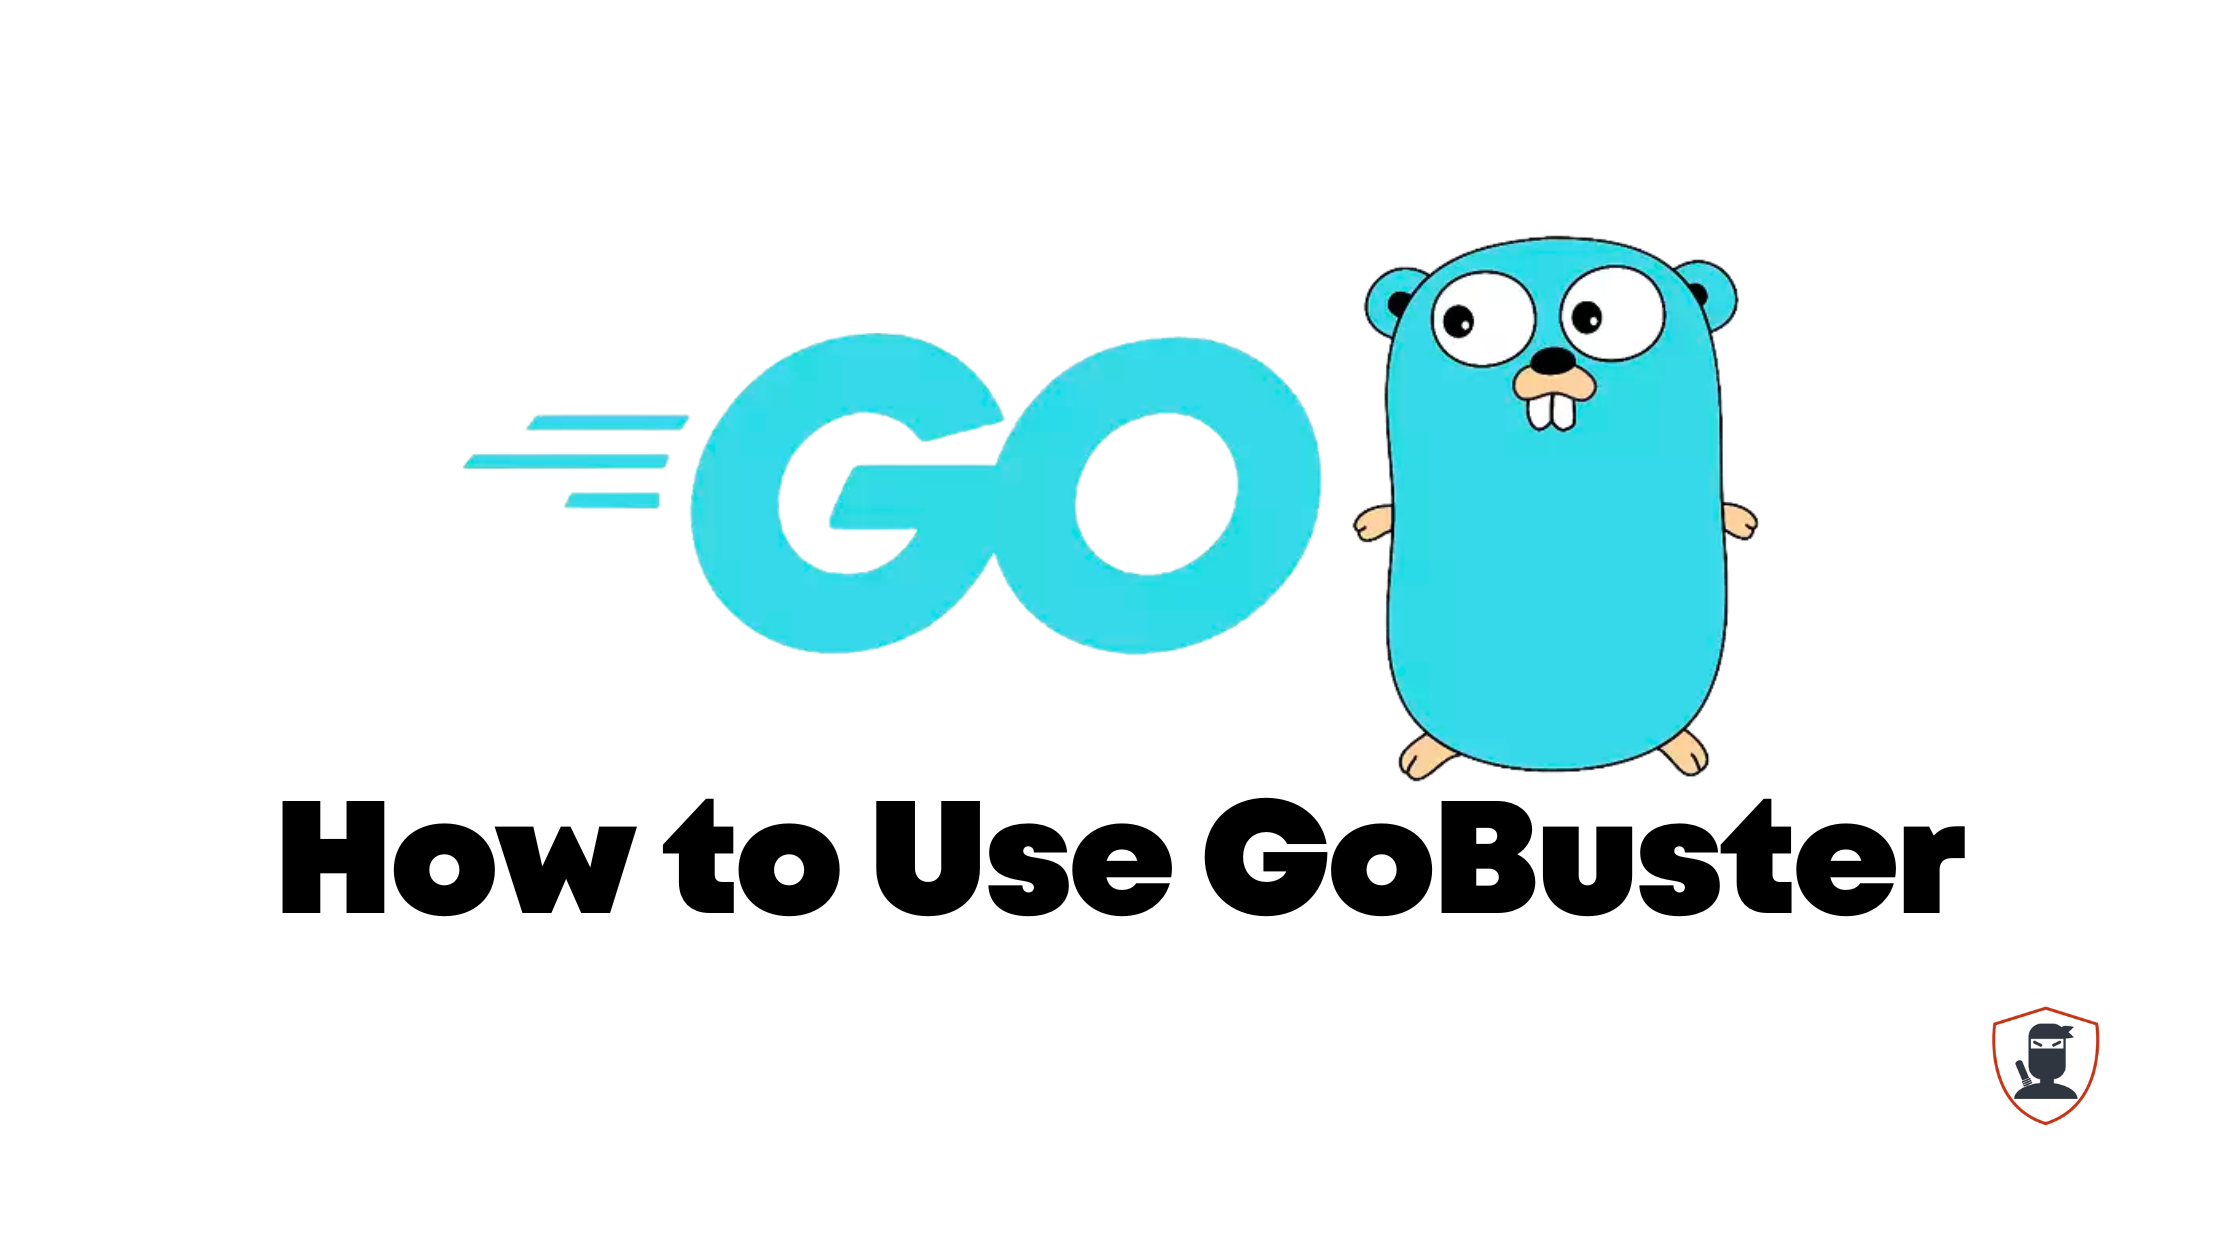 Gobuster Tutorial – How to Find Hidden Directories, Sub-Domains, and S3 Buckets